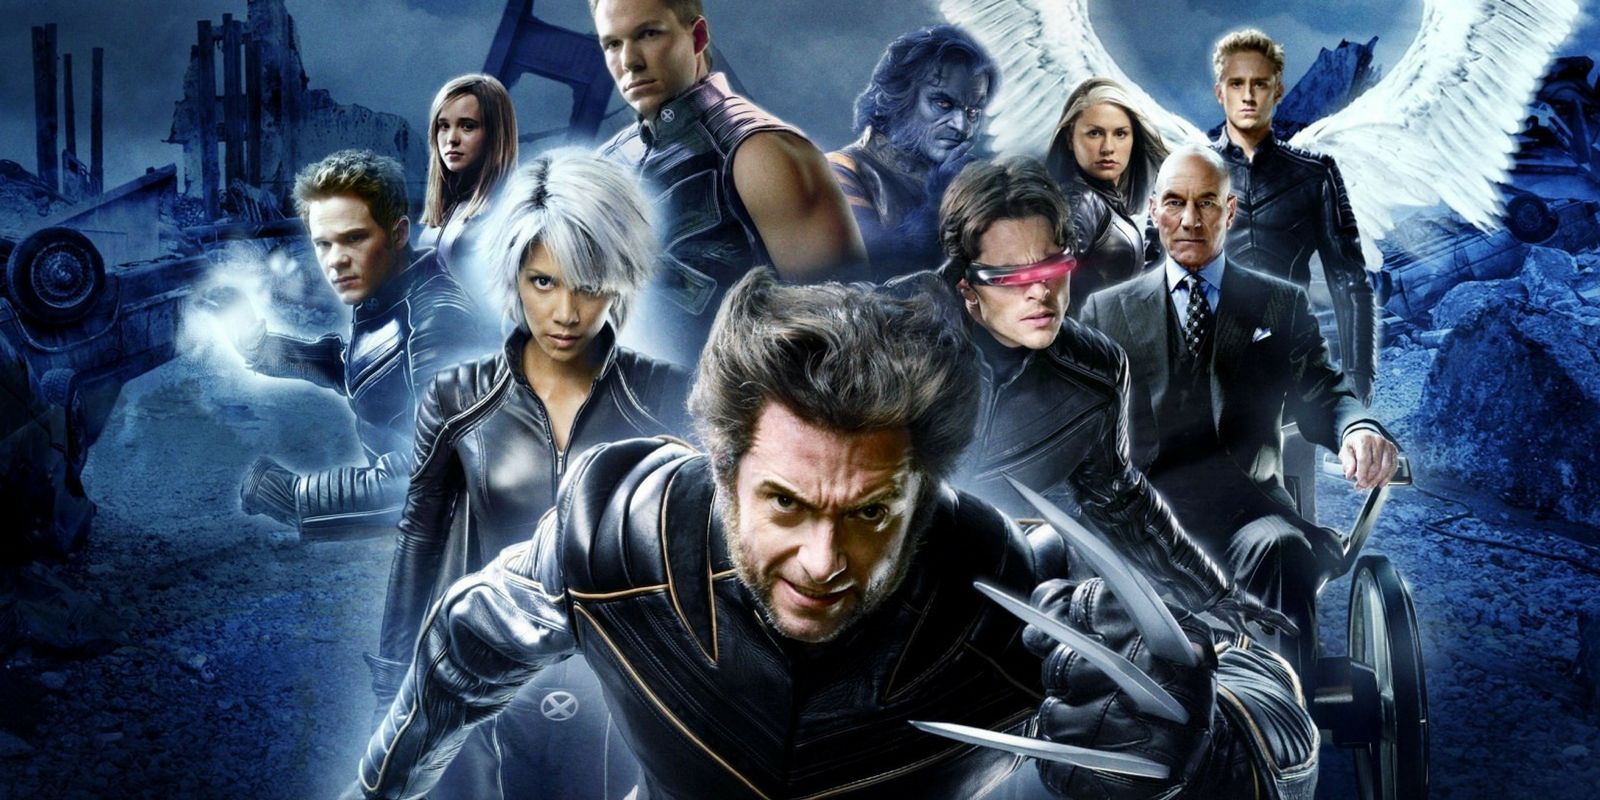 Poster for X-Men The Last Stand featuring Wolverine, Storm, Professor X